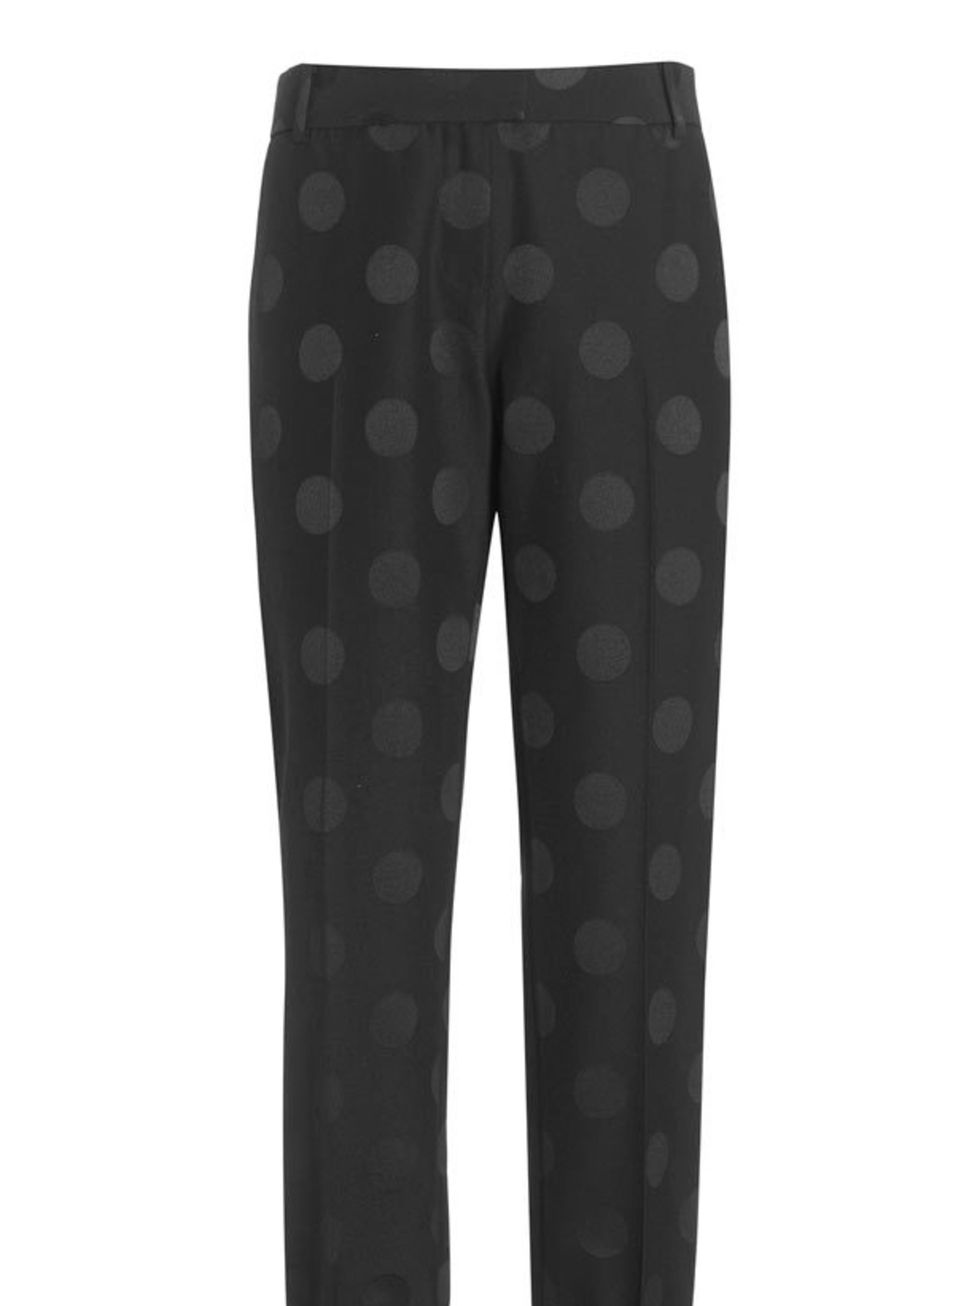 <p>Boutique by Jaeger polka dot trousers, £130, for stockists call 0845 051 0063</p>